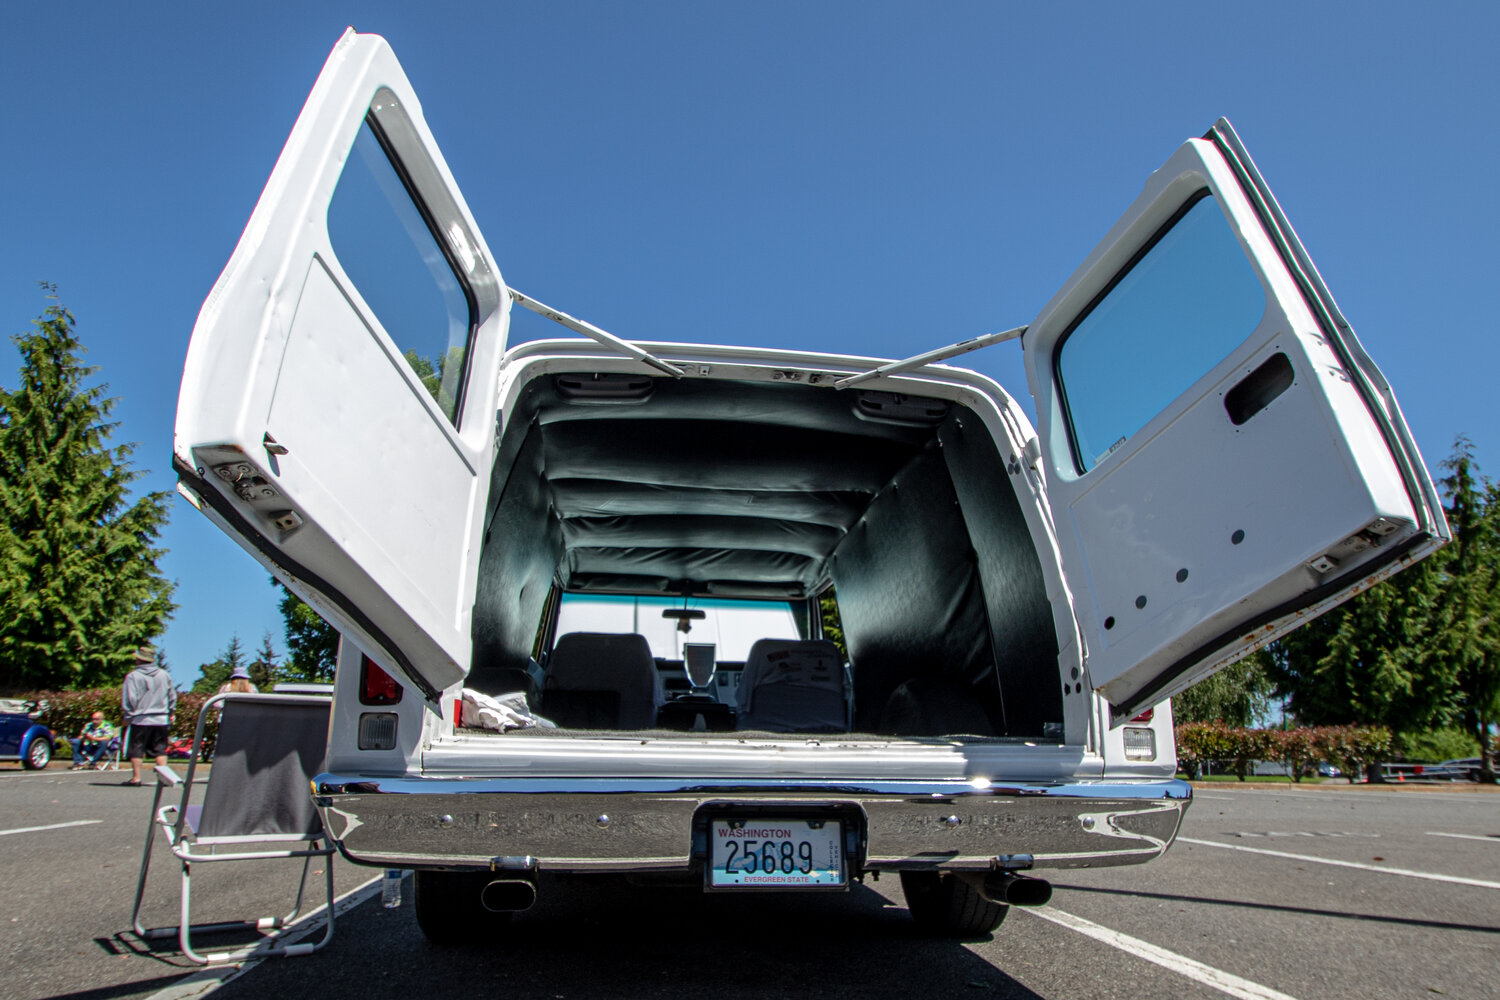 The trunk doors of Jay Gregory's 1970 Chevrolet C/10 panel truck point toward the sky while the truck was displayed at the Yelm High School car show on Sunday, June 4.